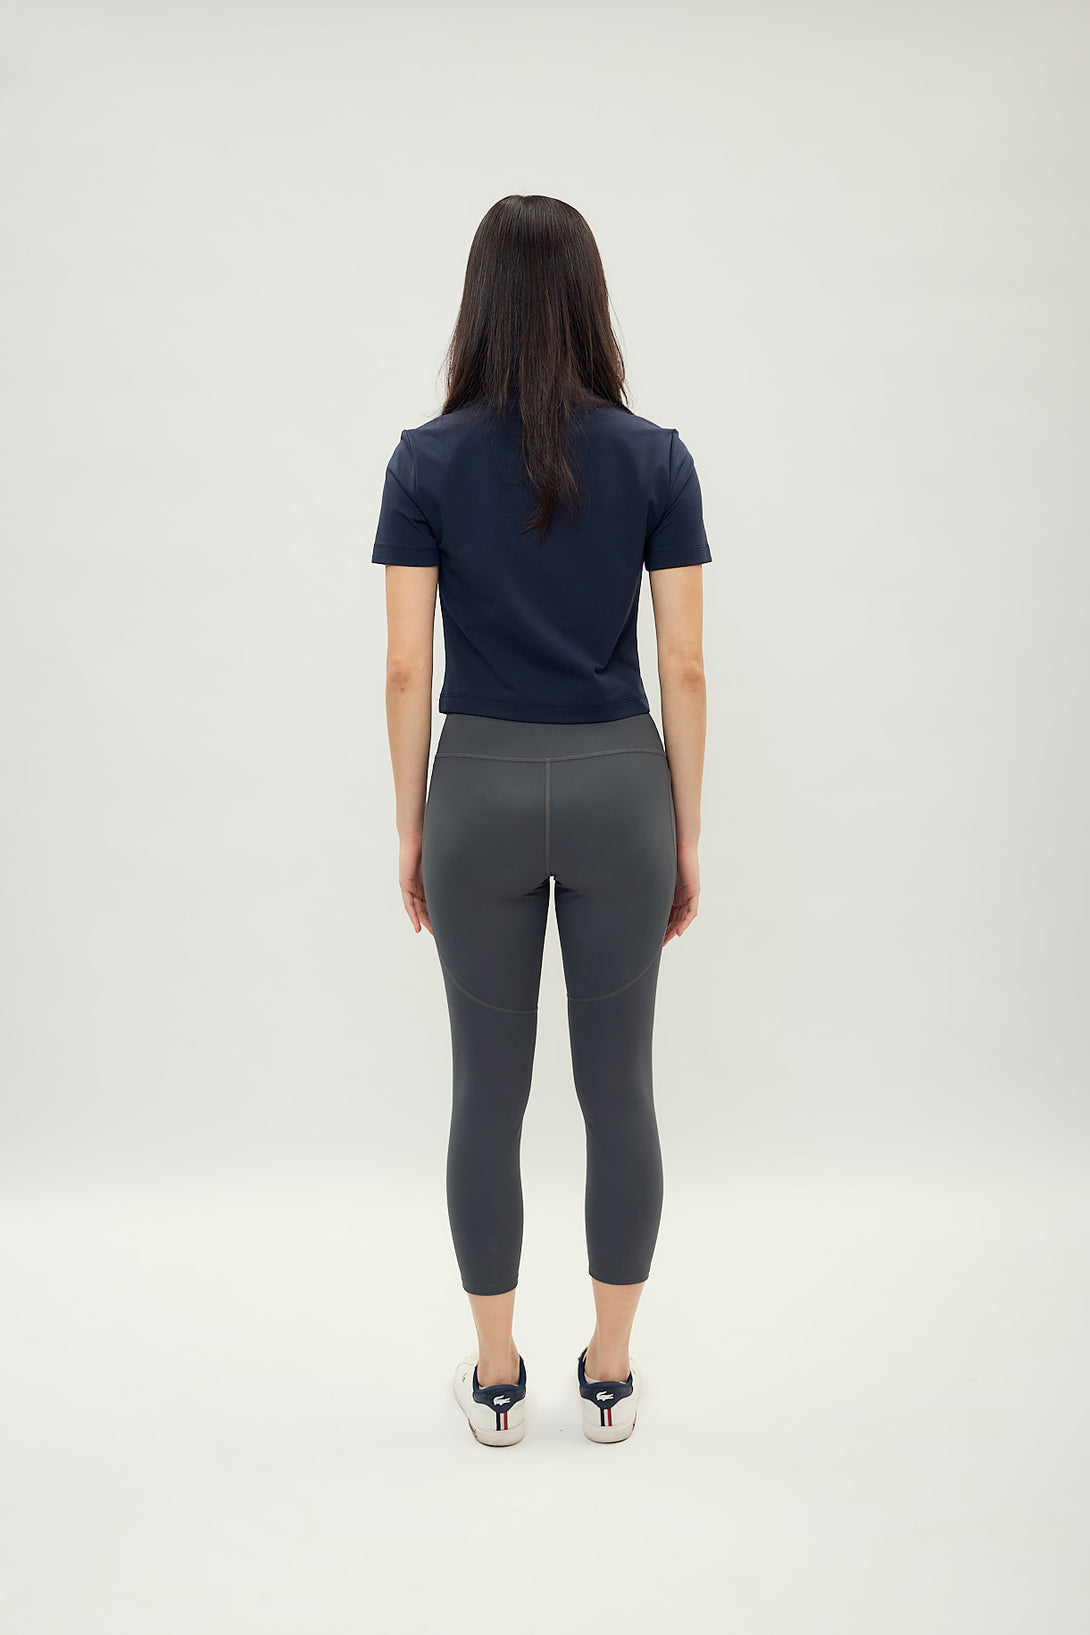 All Day Stretch Cropped Tee product image 4